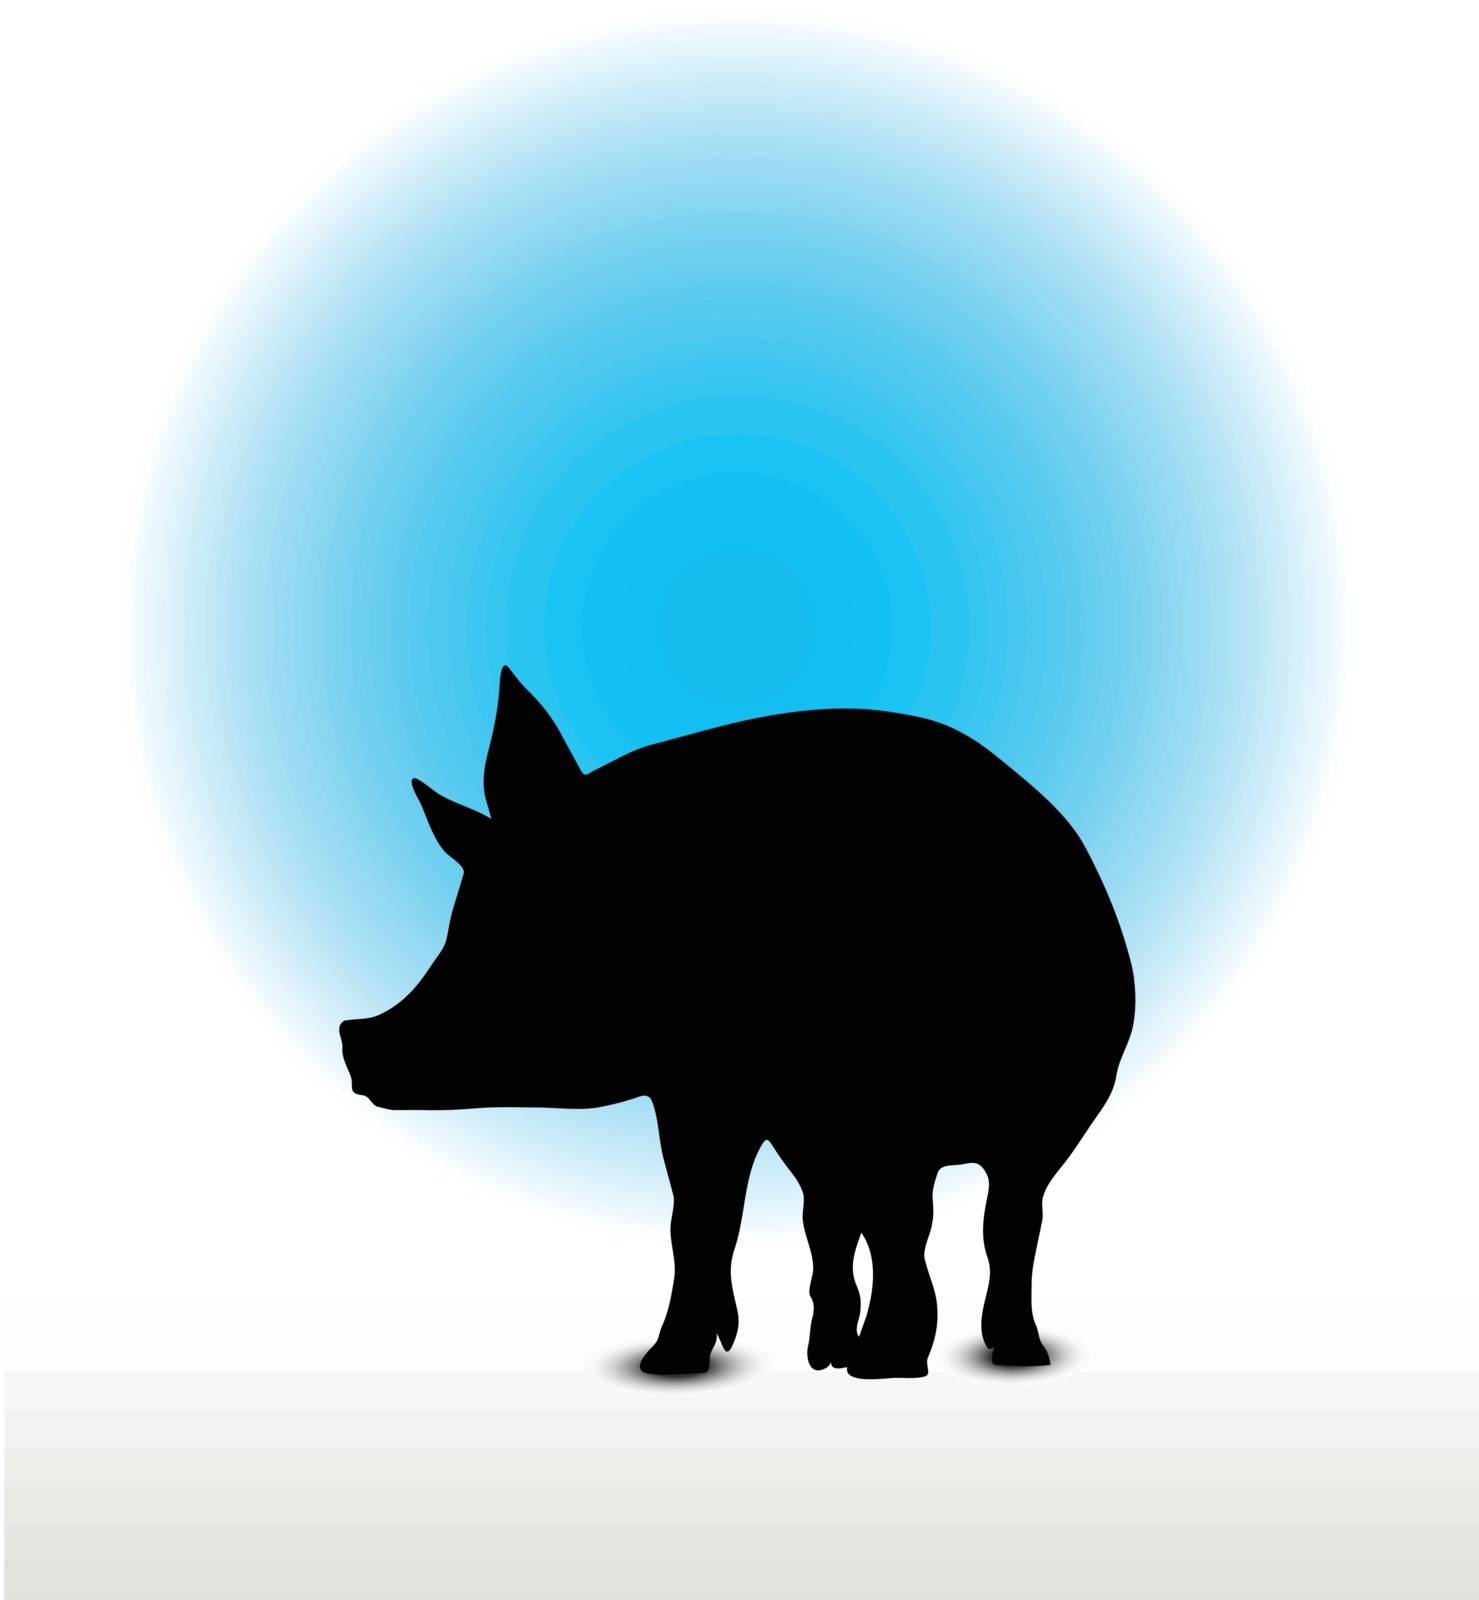 Vector Image, pig silhouette, in a standing position, isolated on white background
